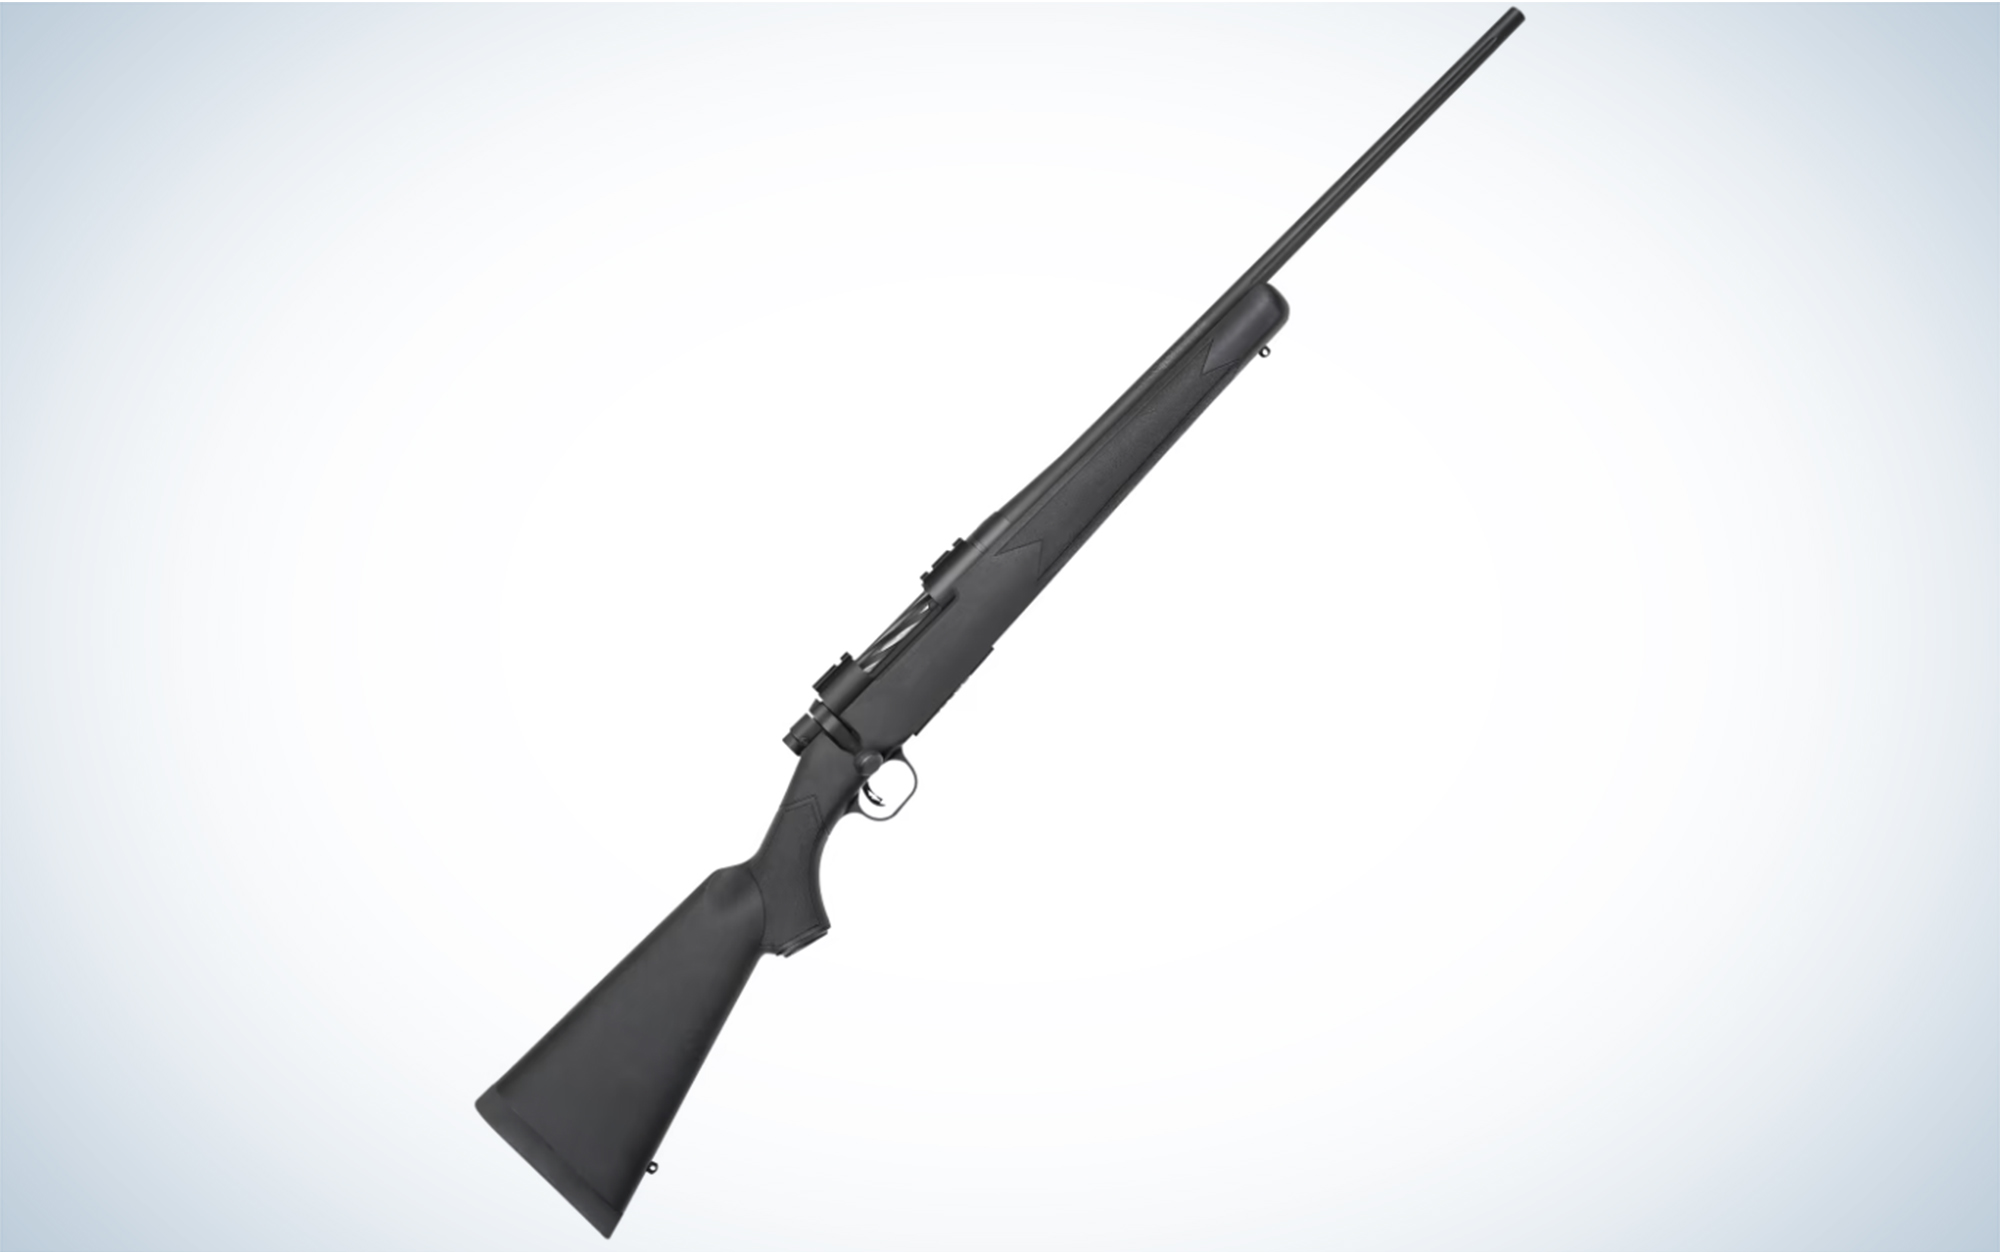 The Mossberg Patriot is one of the best guns for hog hunting.